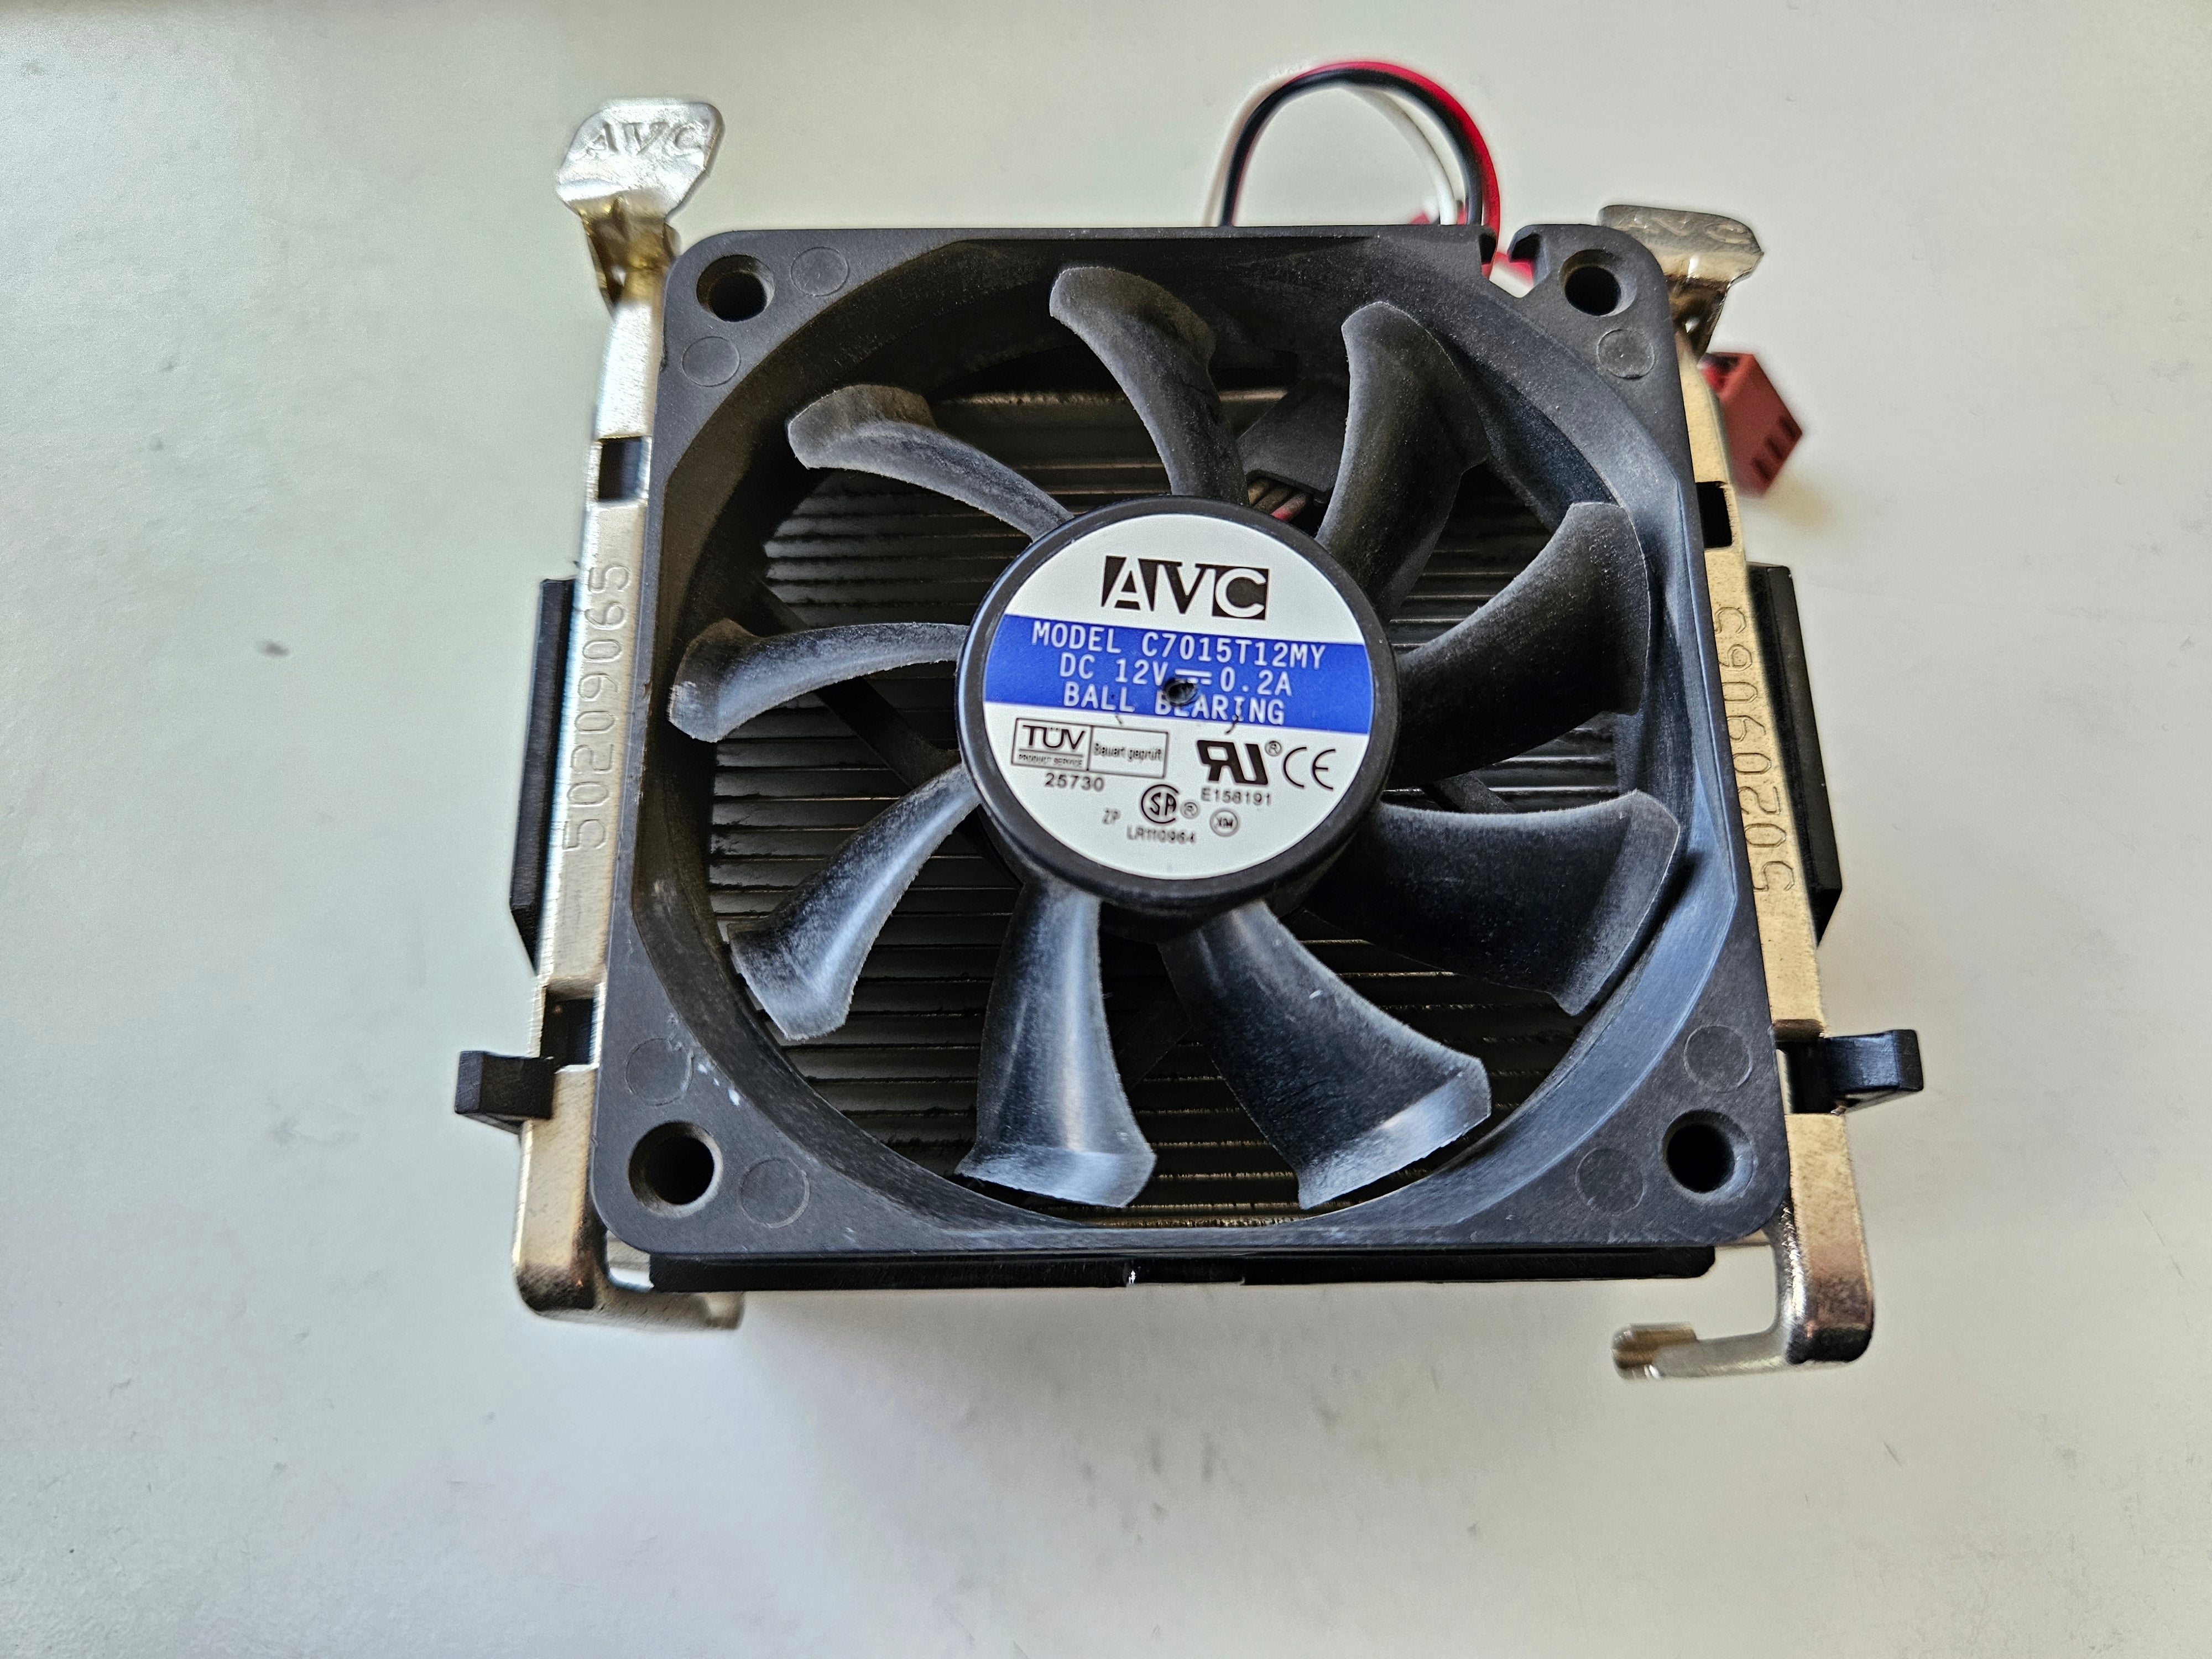 AVC DC12V 0.2A Ball Bearing 3Wire Cooling Fan with Heatsink ( C7015T12MY ) USED